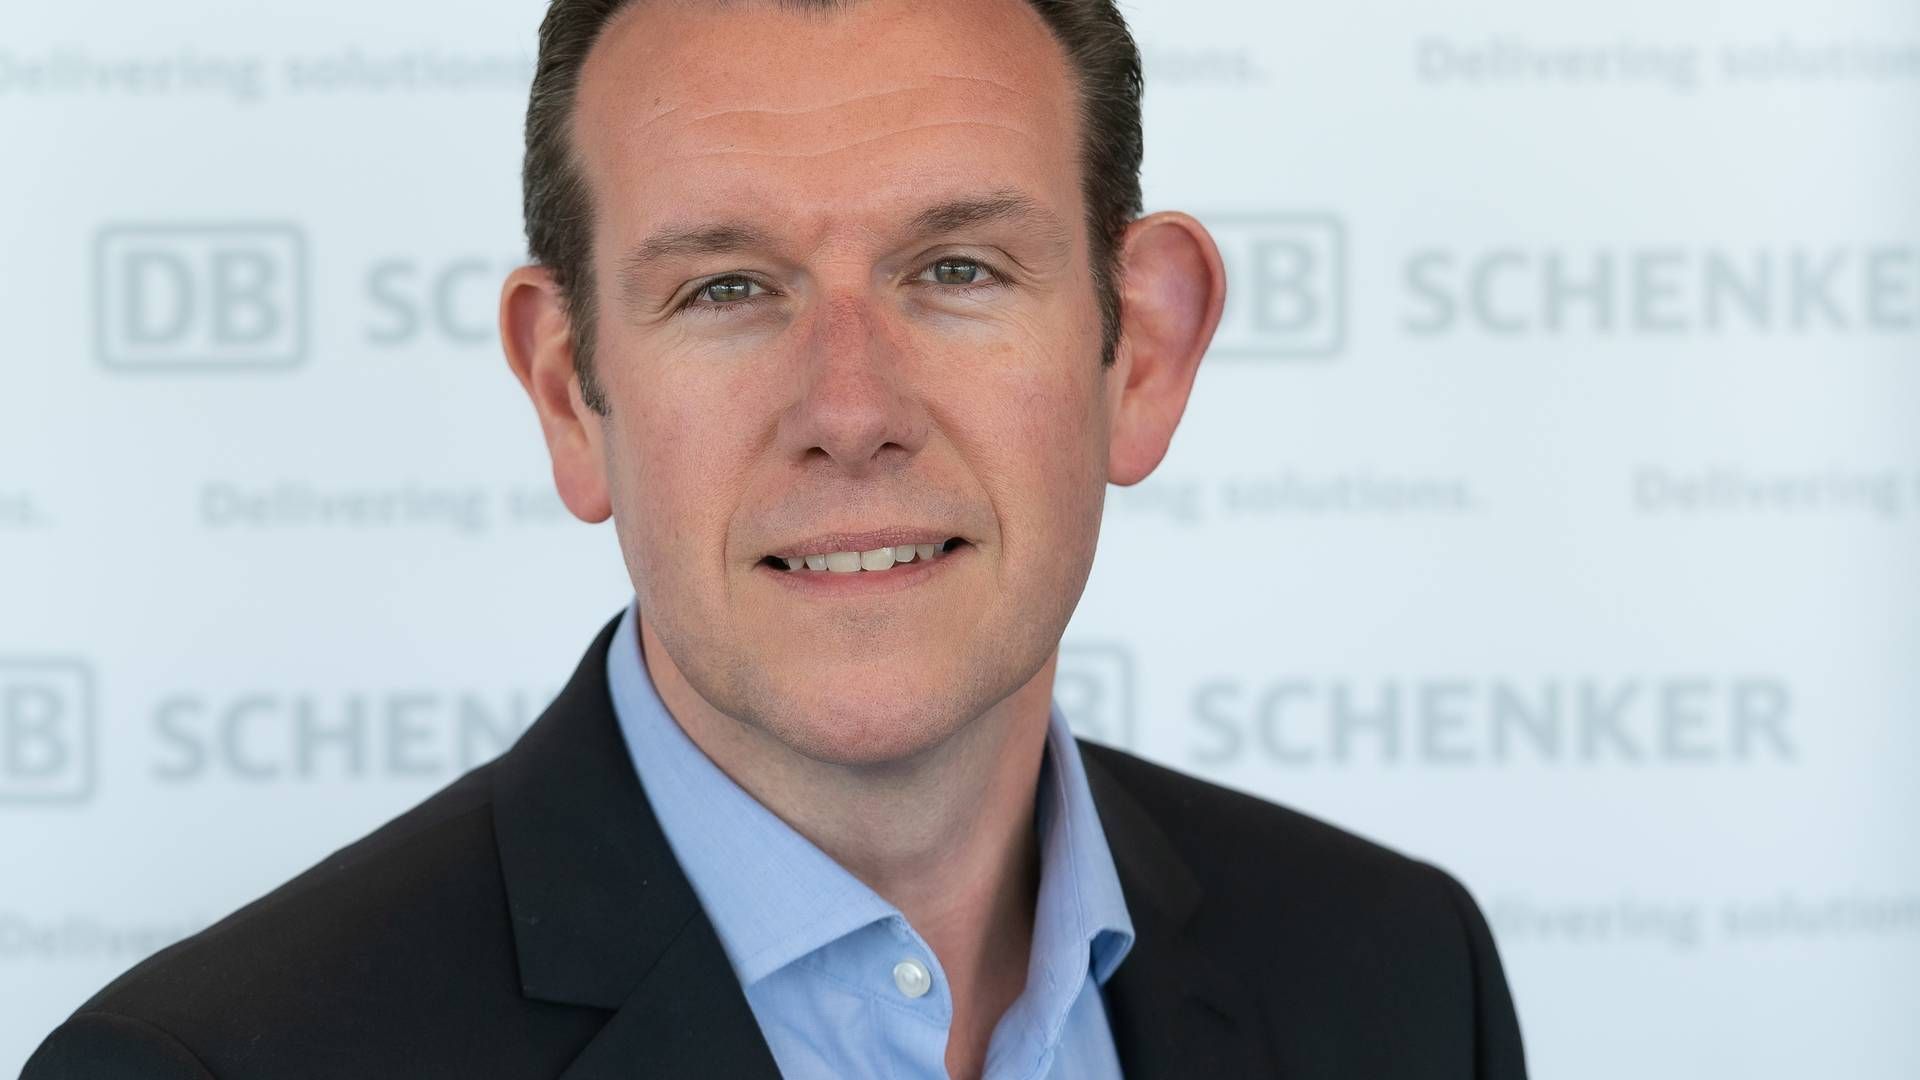 The new CEO brings a wealth of experience having spent more than 28 years in international logistics and supply chains including 13 years at DHL. | Photo: DB Schenker